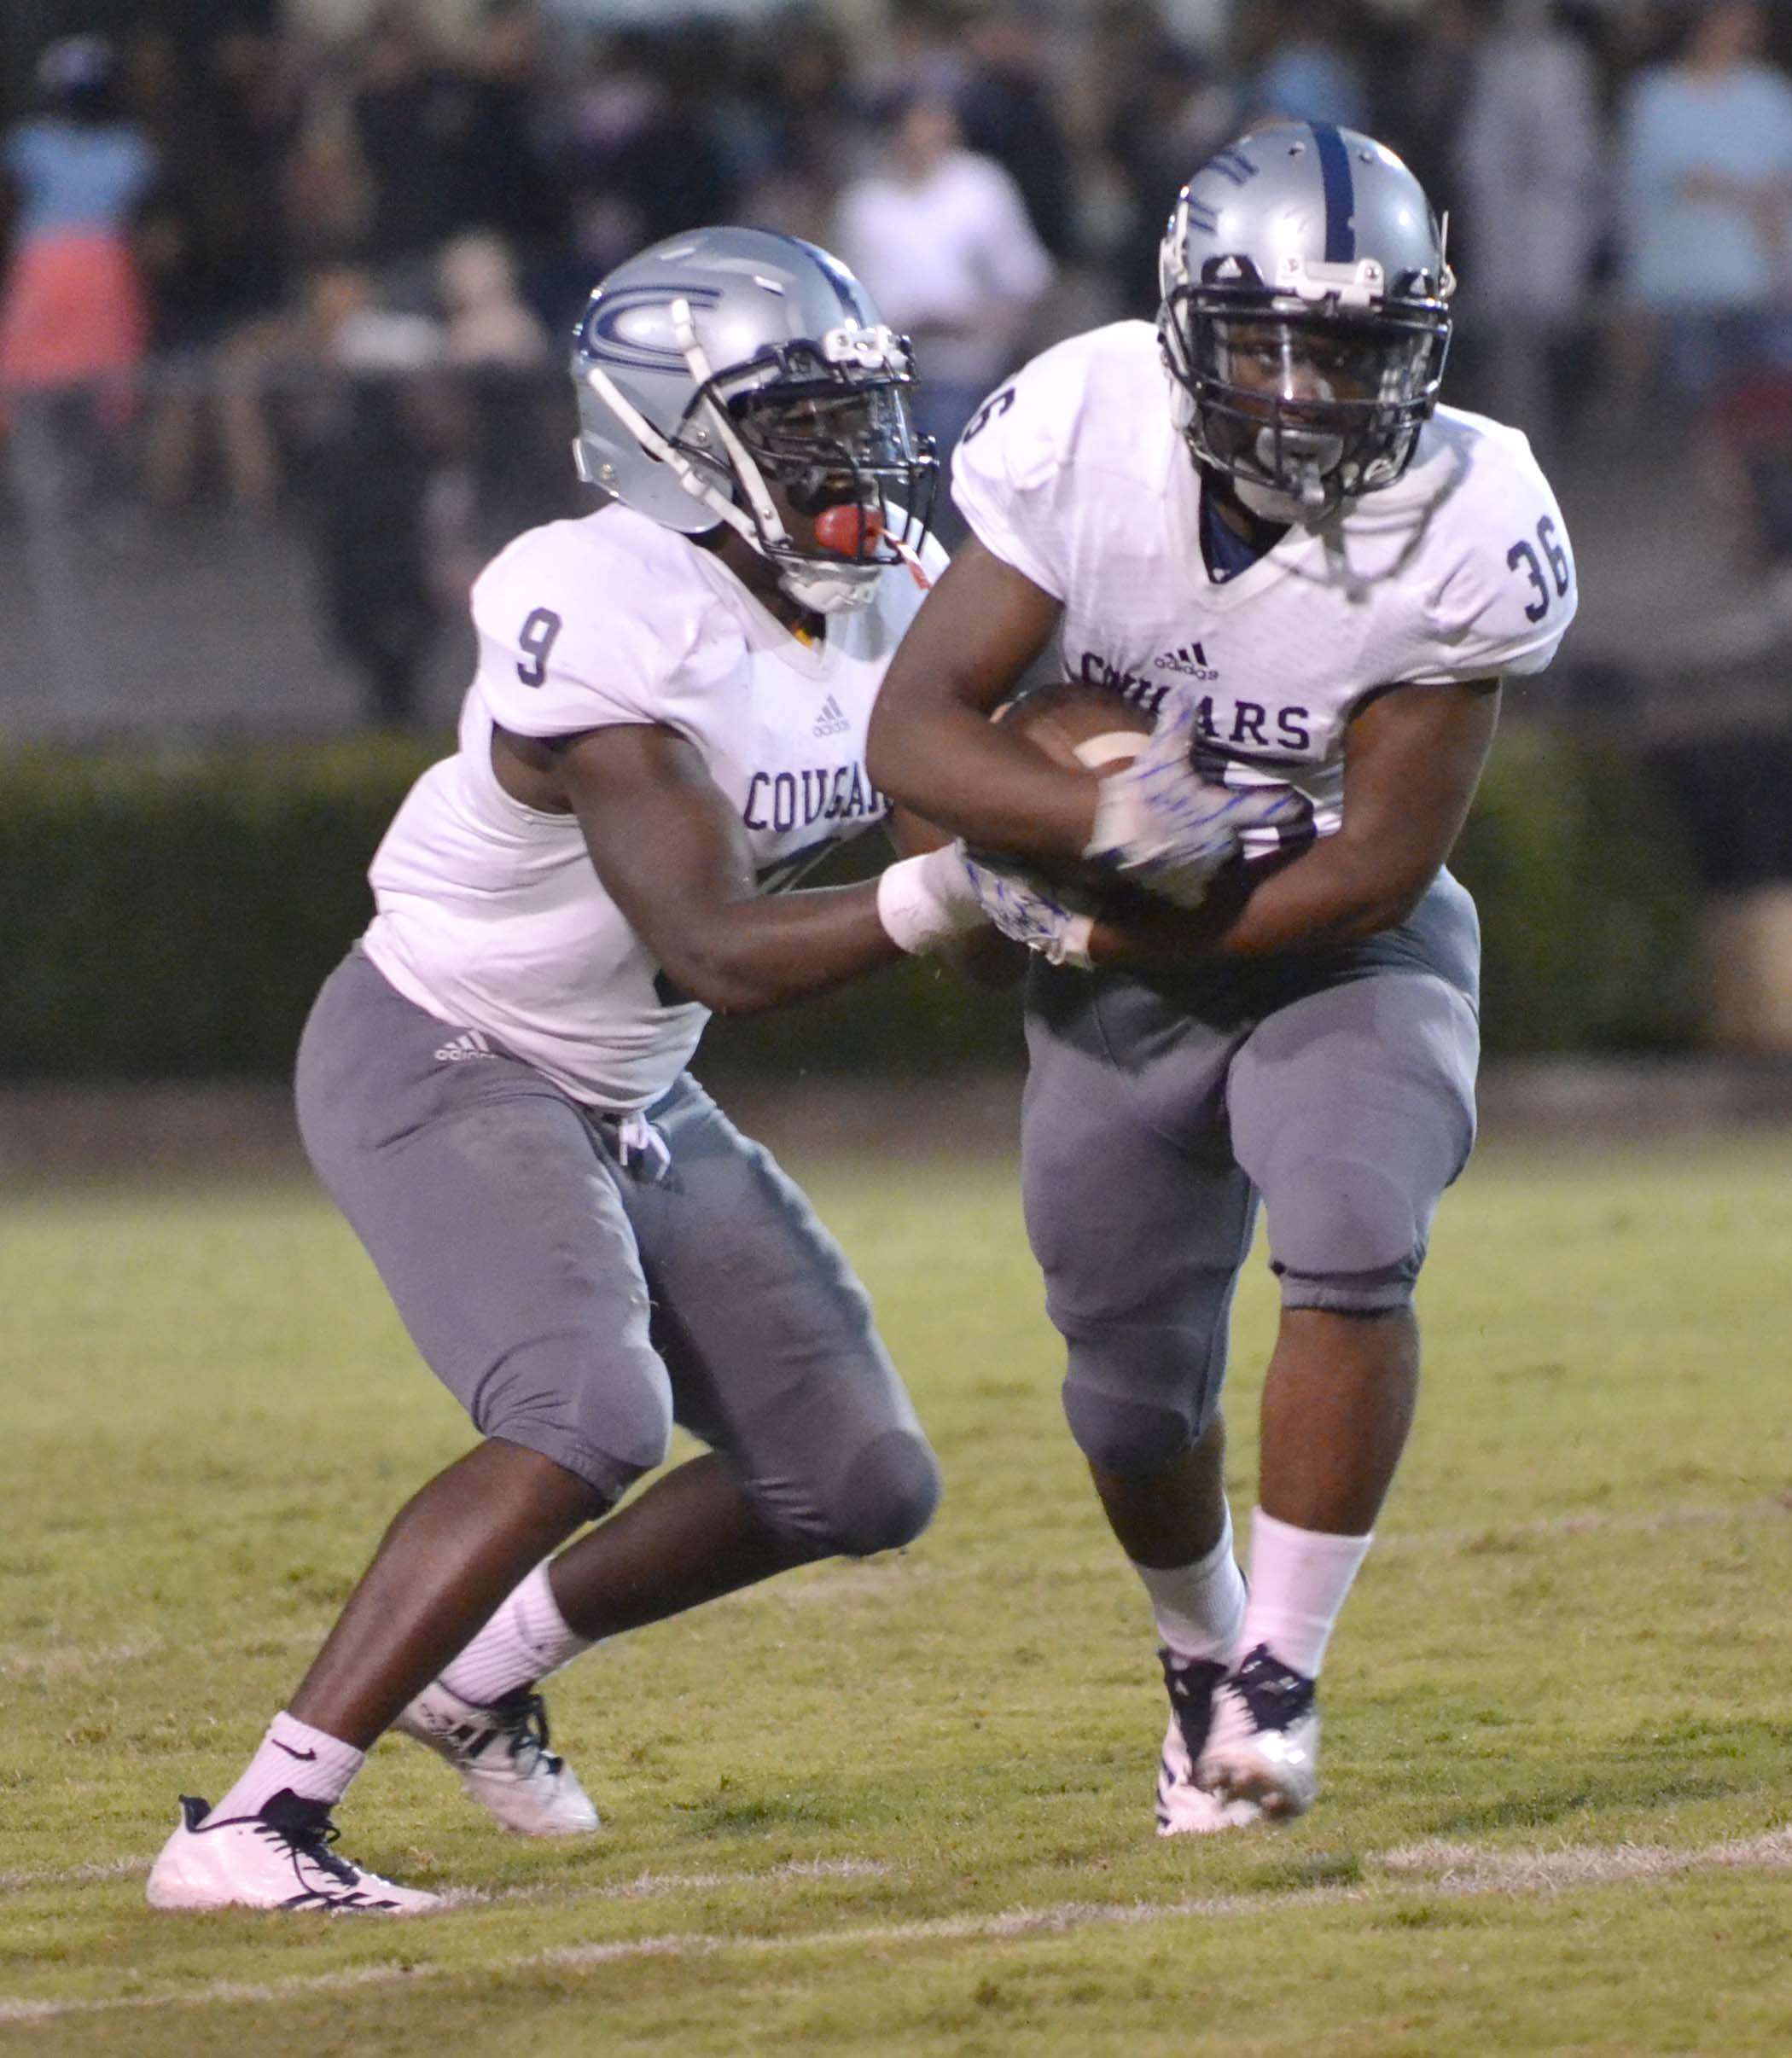 Clay-Chalkville Cougars claw Vikings 41-6